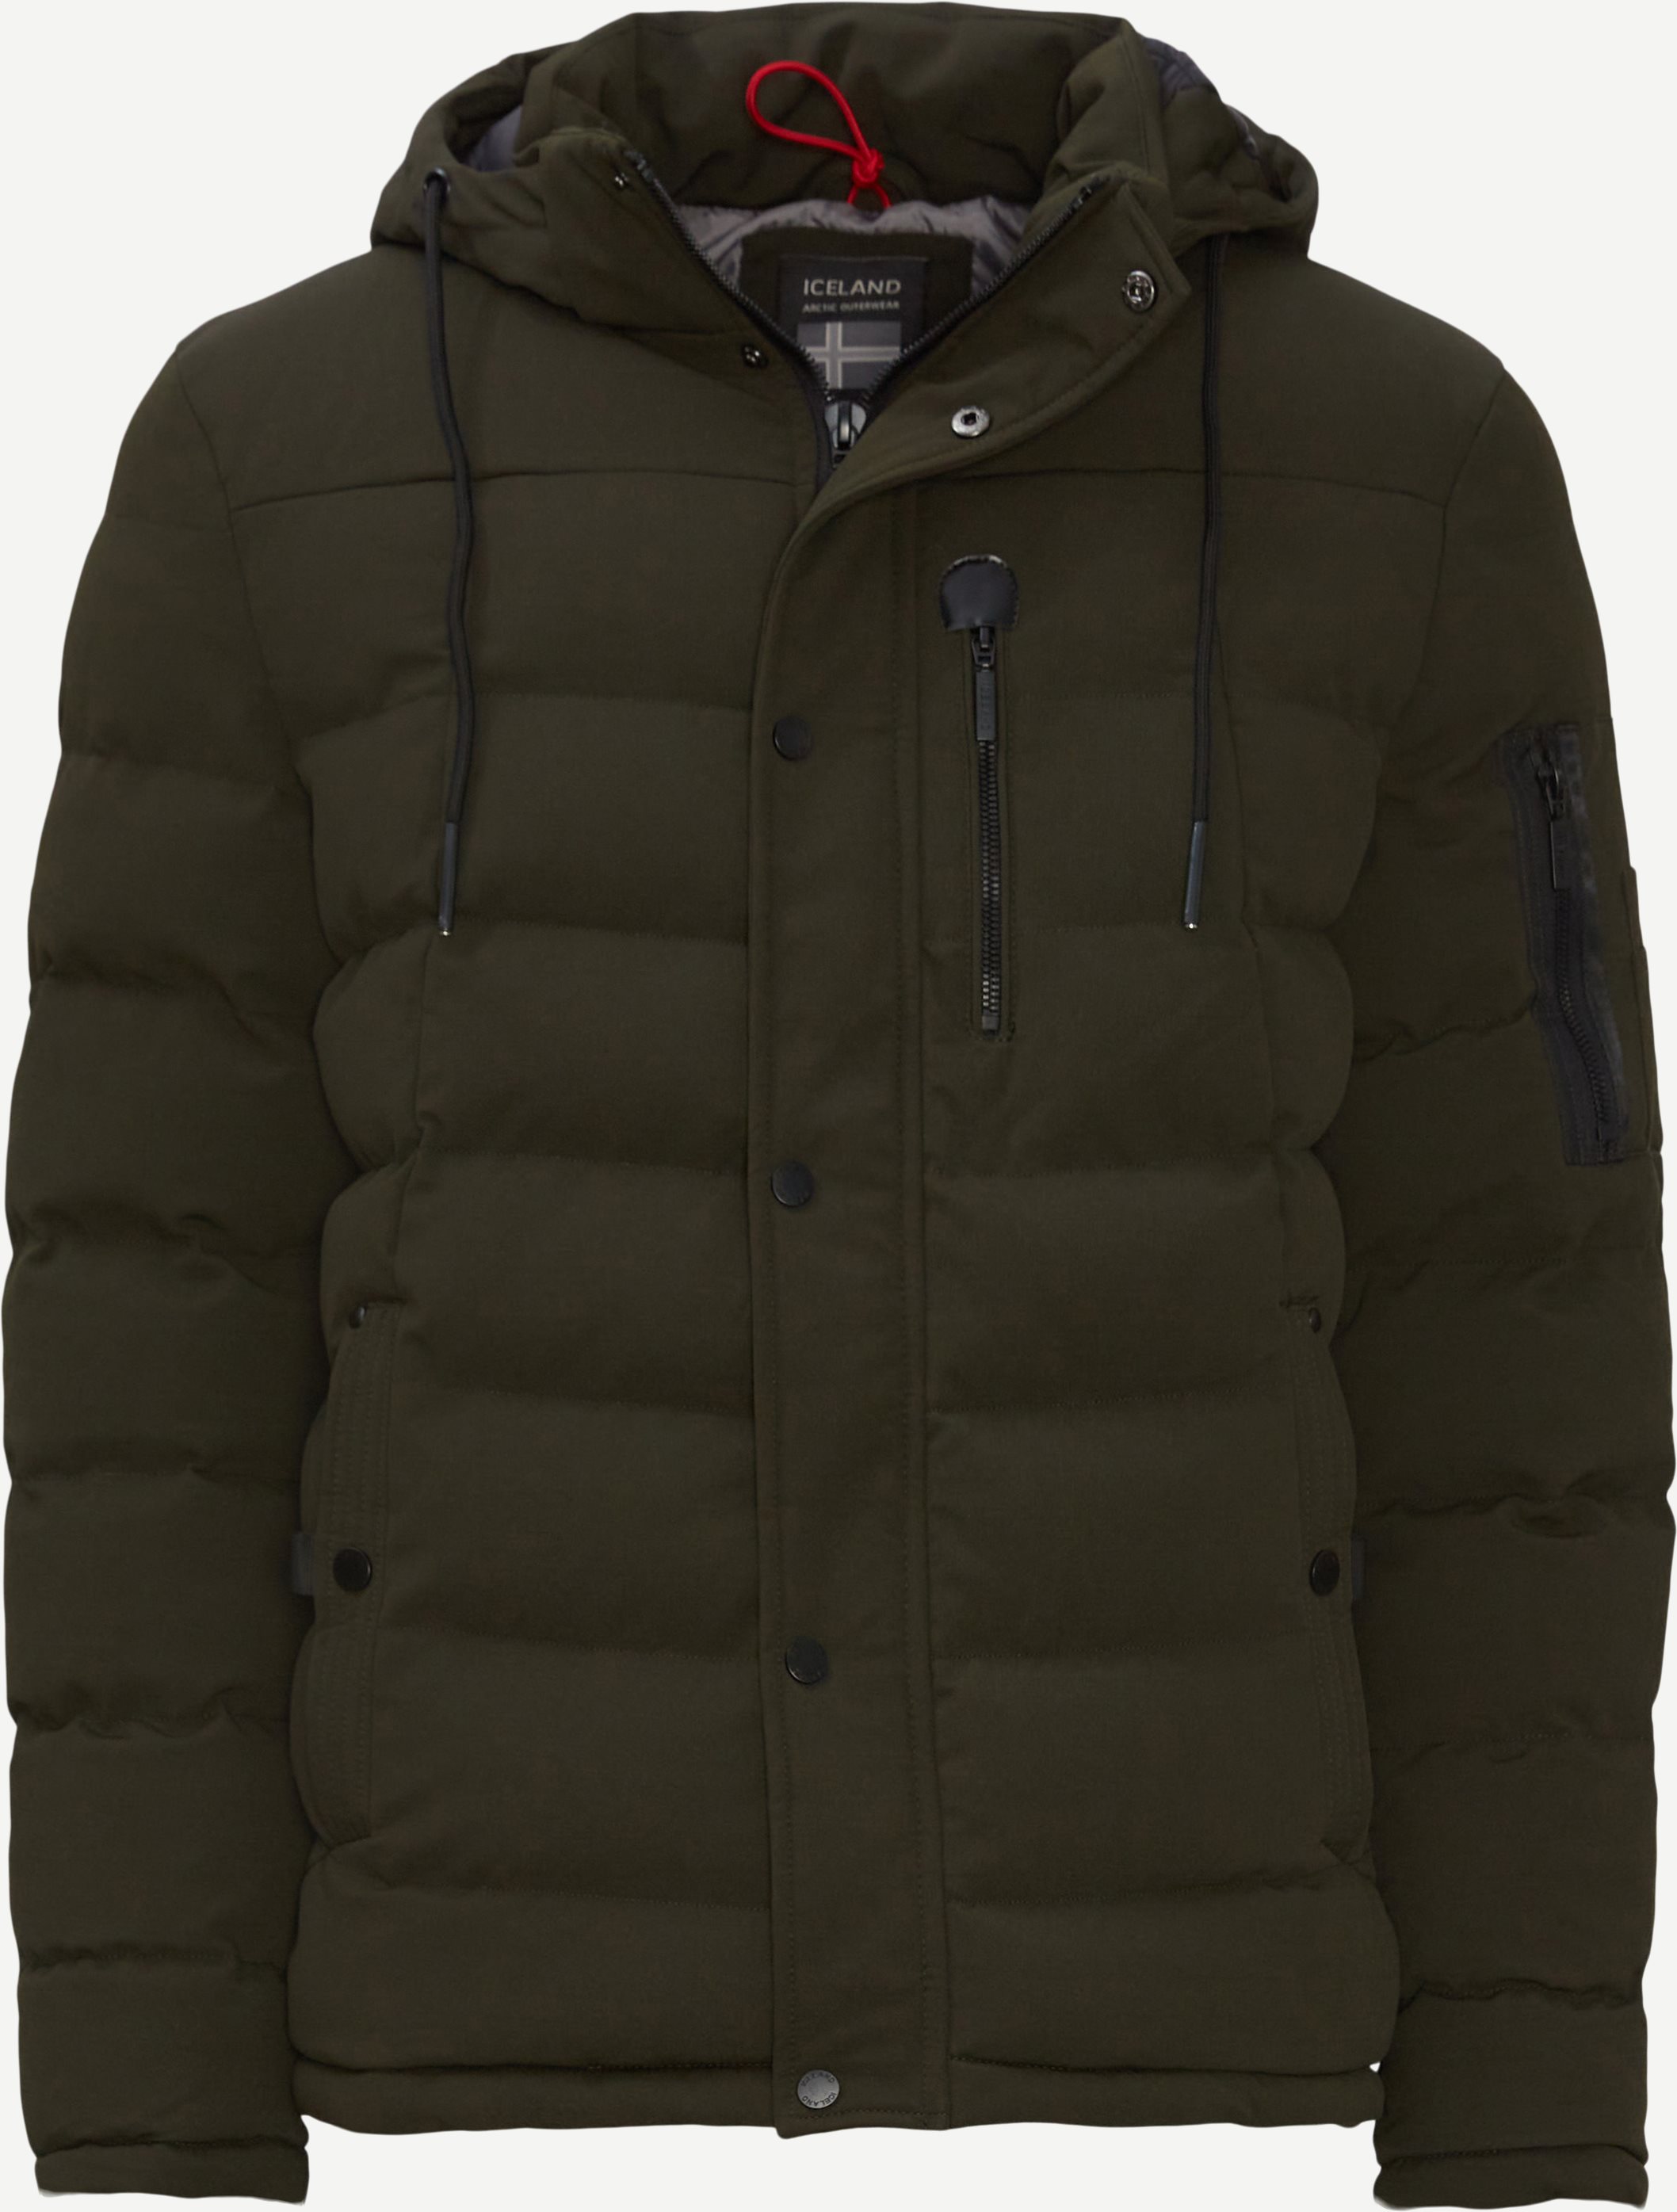 Jackets - Regular fit - Army